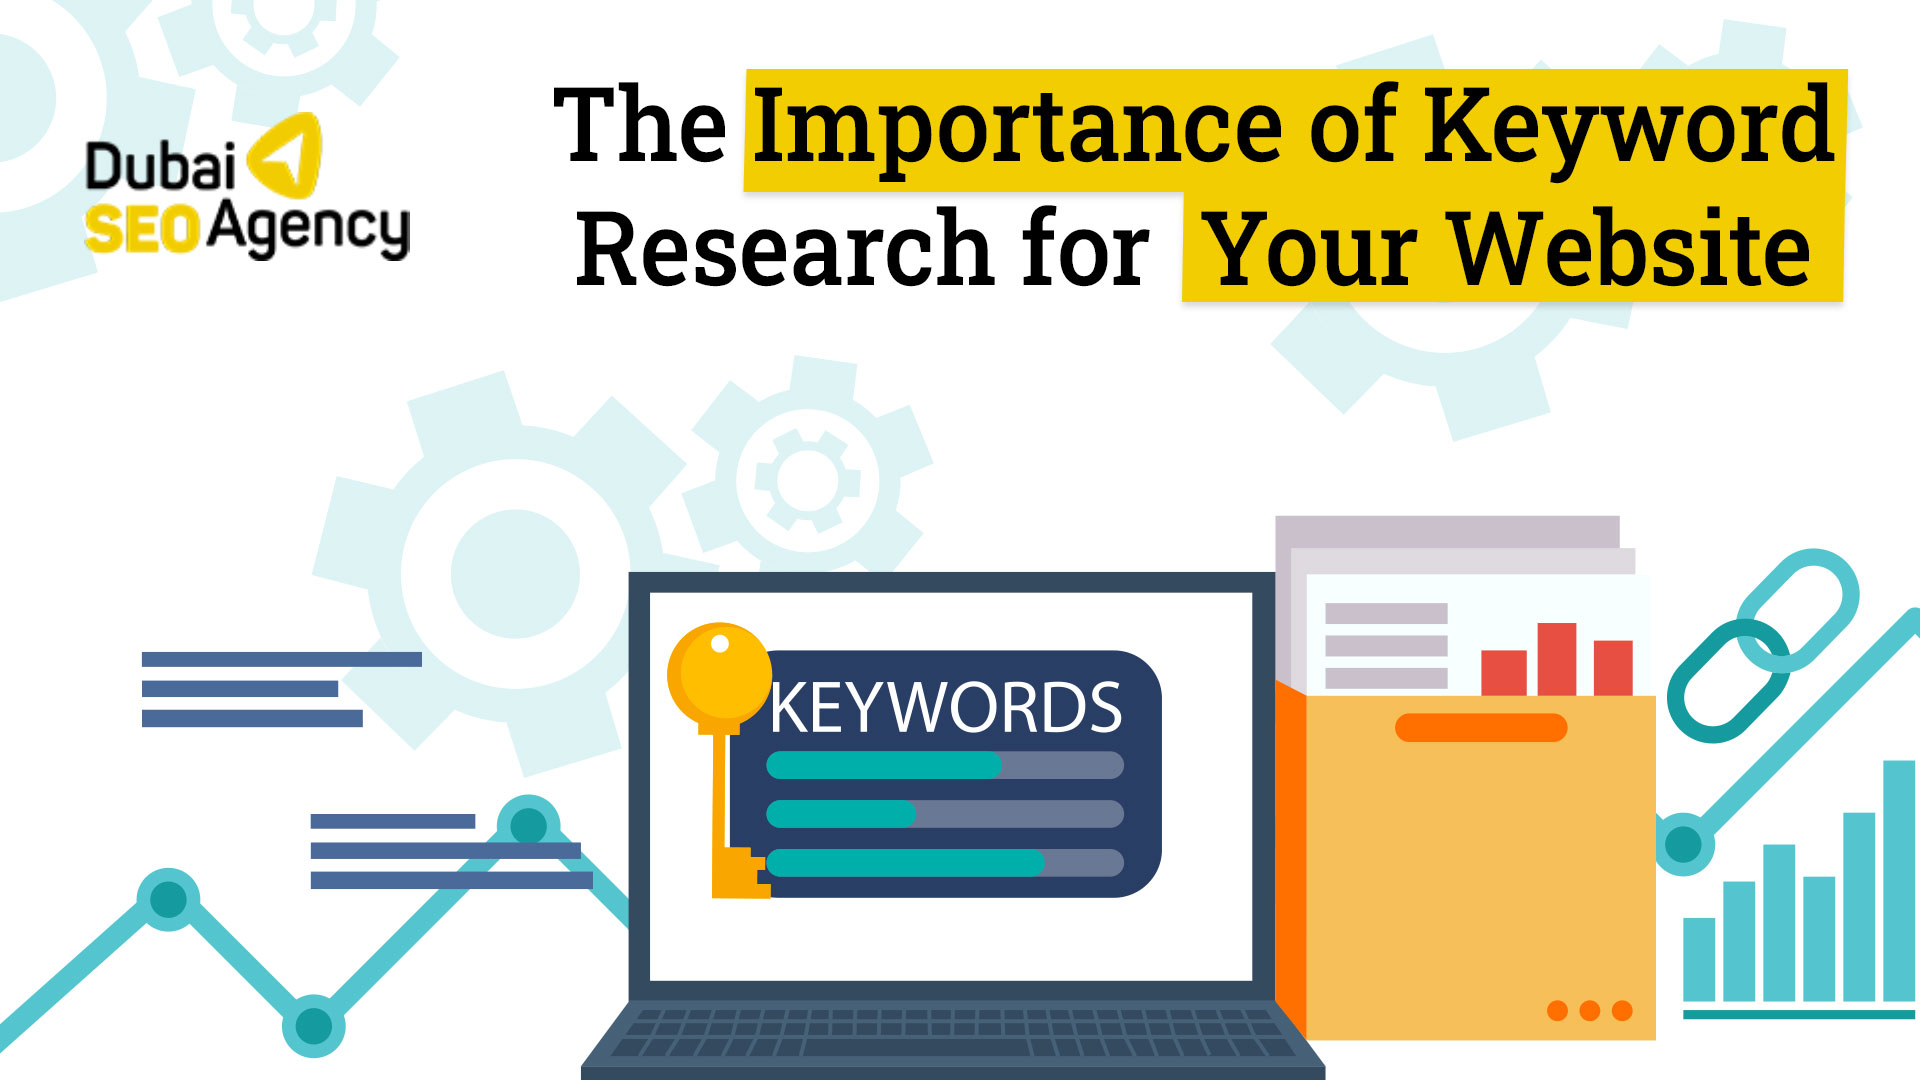 The Importance of Keyword Research for Your Website